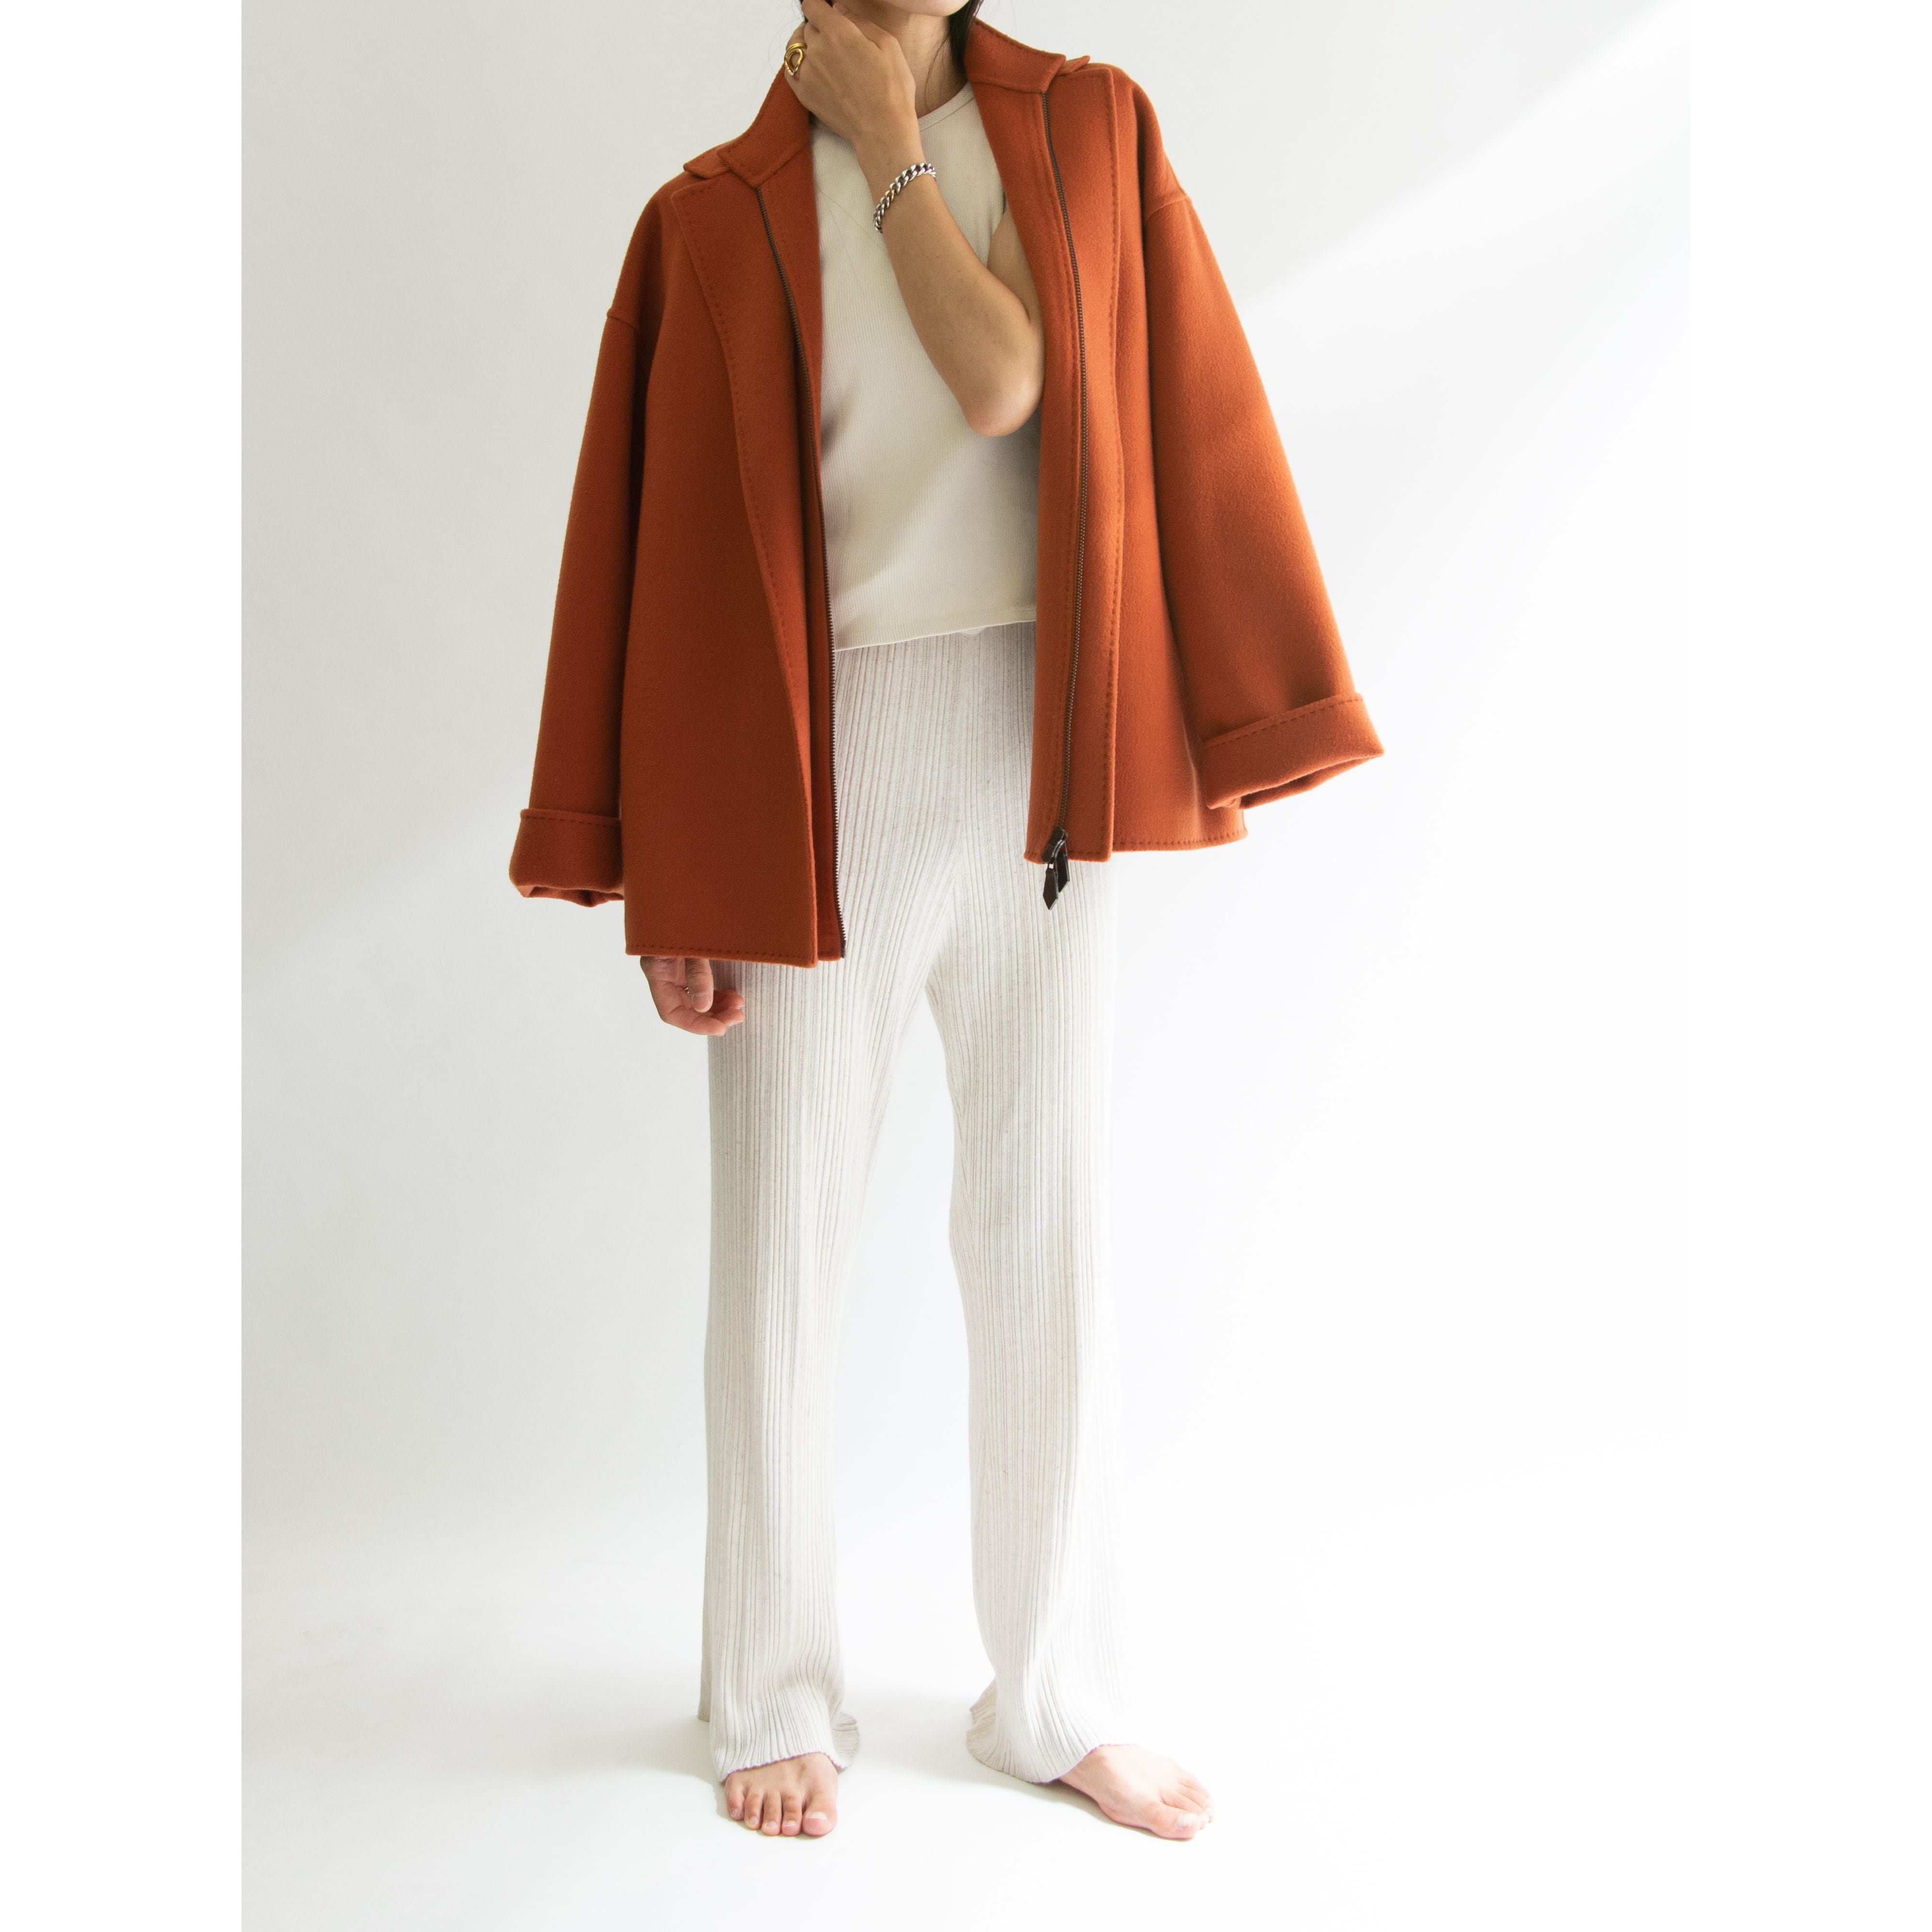 DUSAN】Made in Italy 100% Cashmere Blanket Jacket（ドゥサン